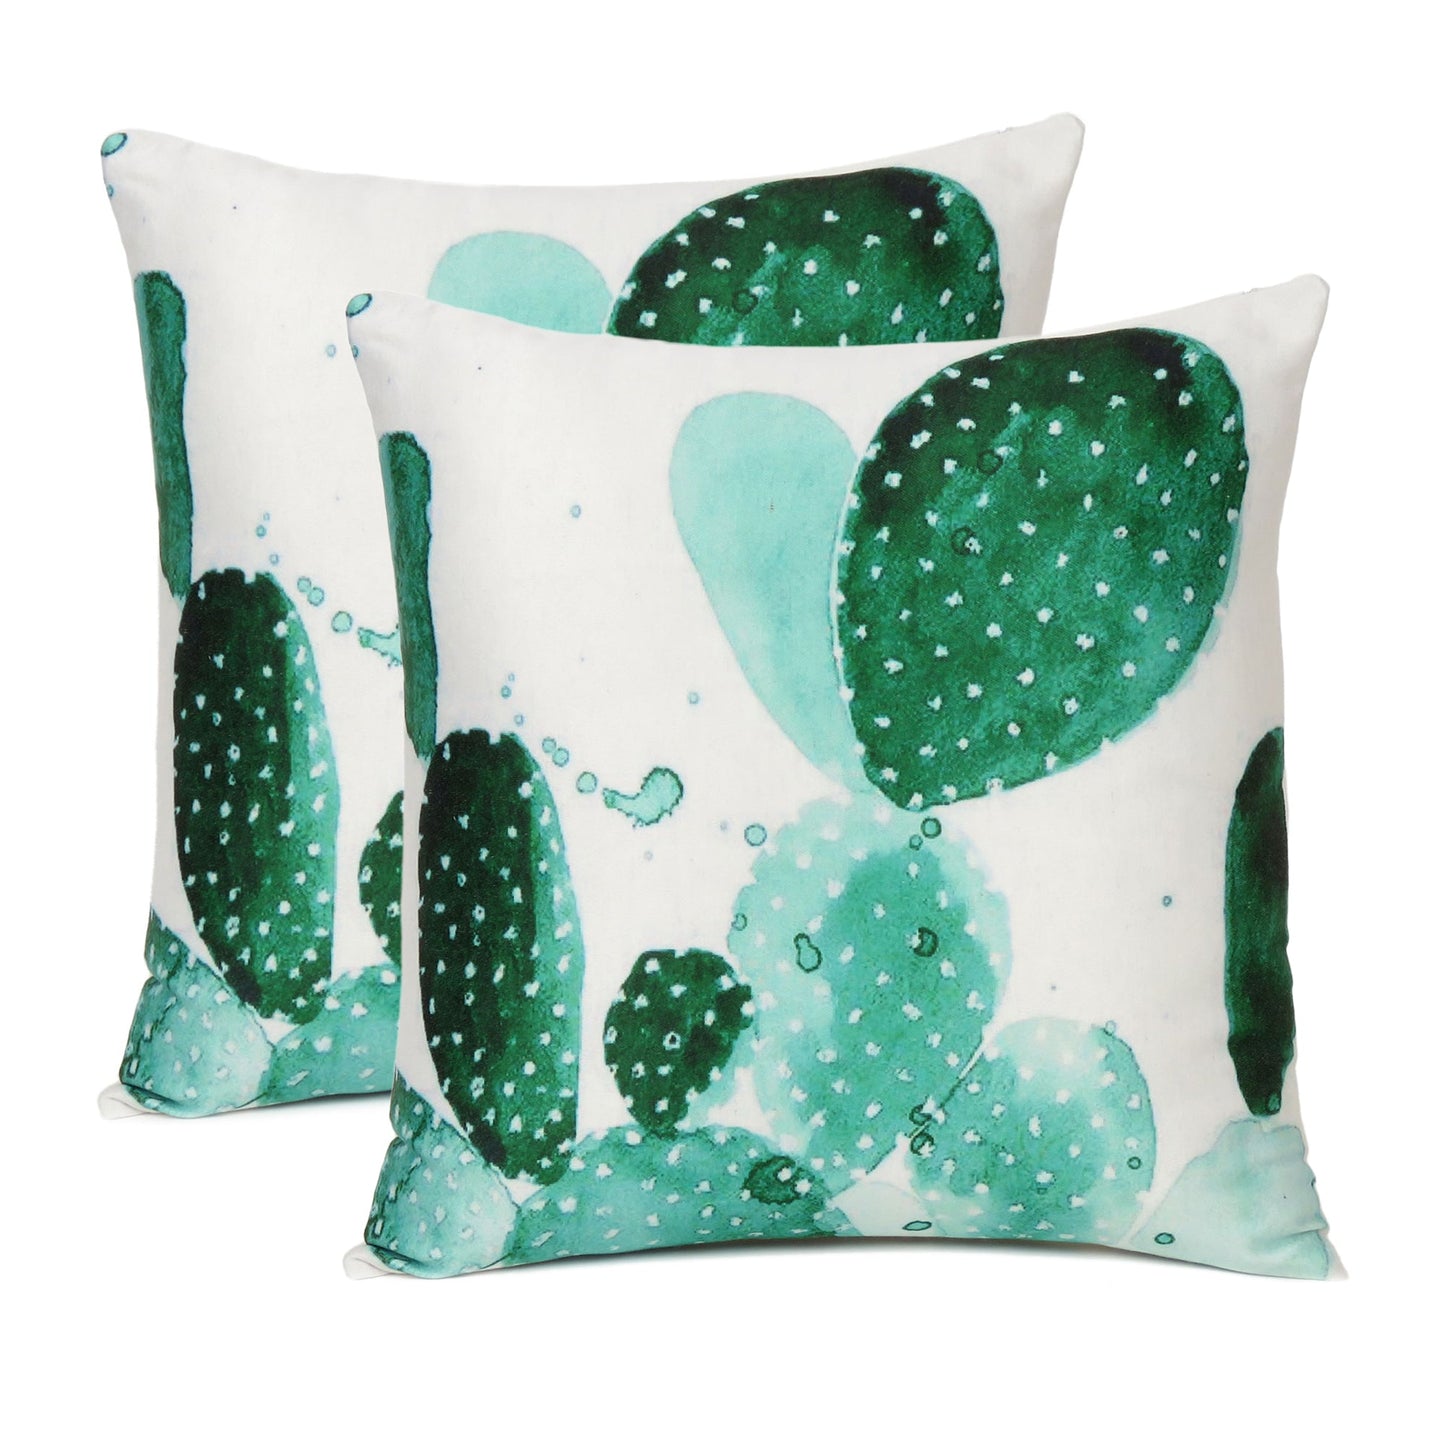 Green Cactus Printed Cushion Cover in Set of 2